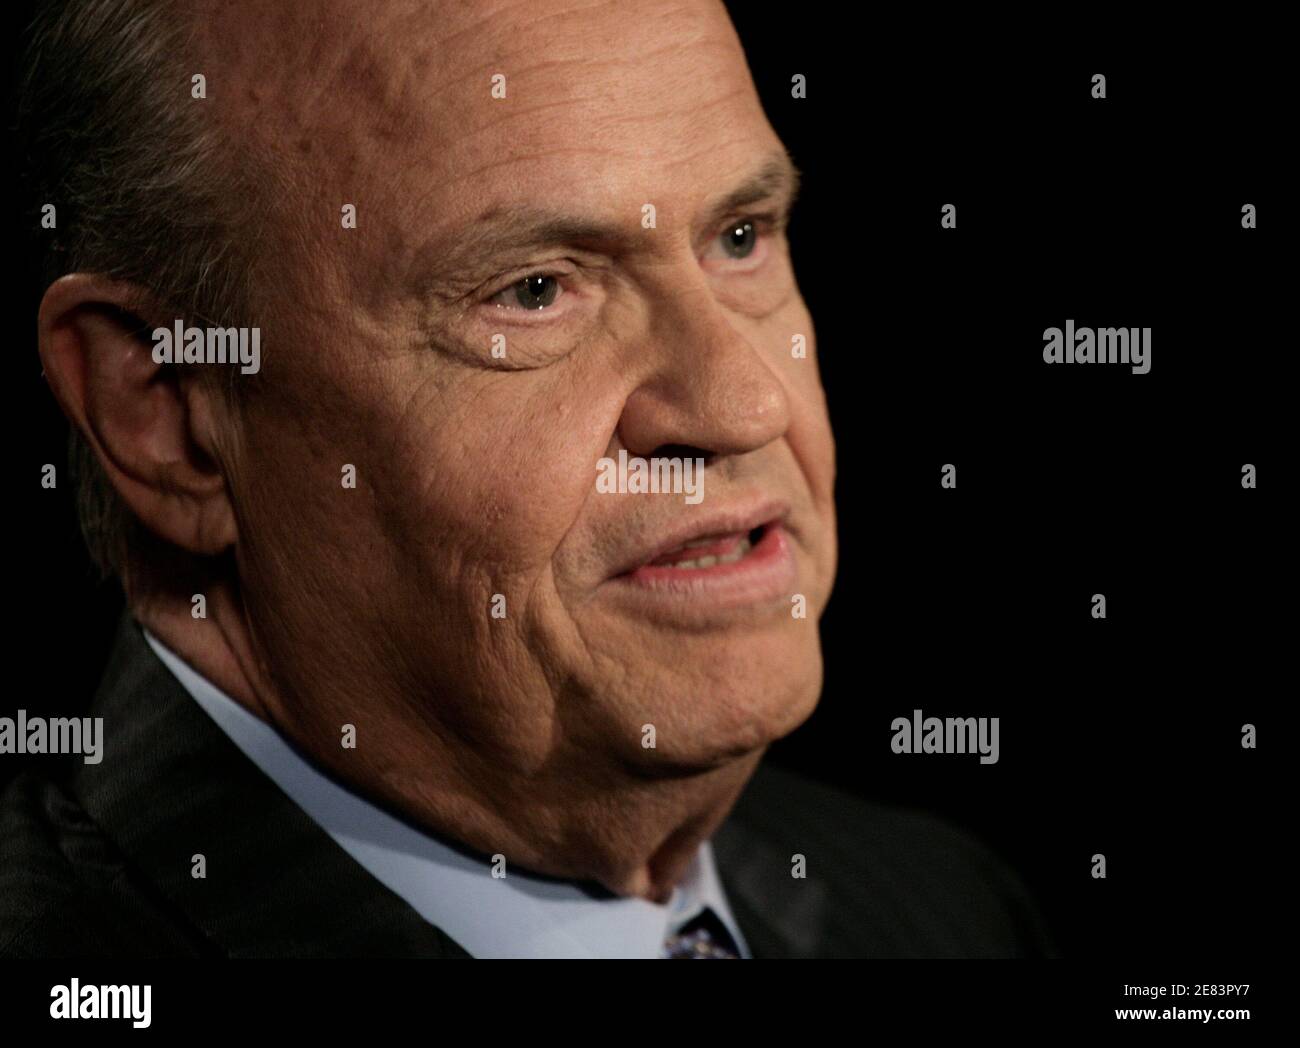 Former U.S. Republican Senator from Tennessee, Fred Thompson, appears on Fox News channel's Hannity and Colmes TV show in Washington June 5, 2007. REUTERS/Yuri Gripas (UNITED STATES) Stock Photo